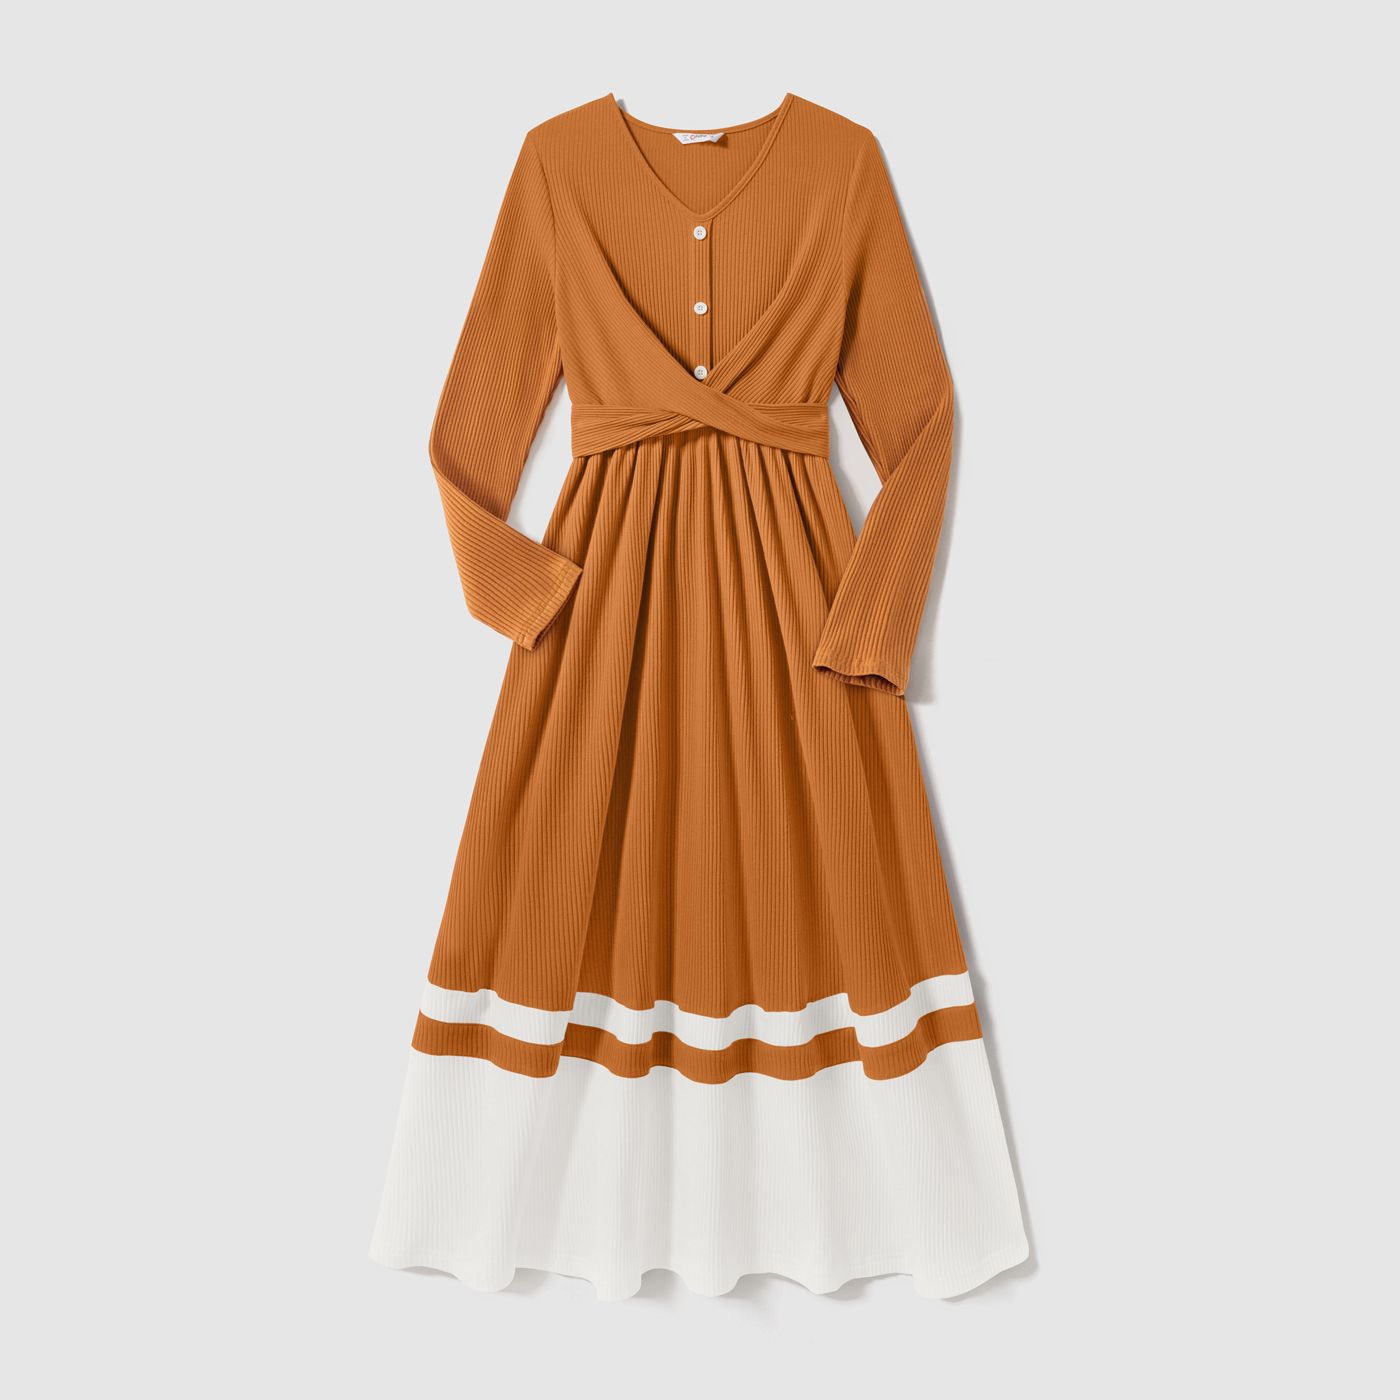 Family Matching Long-sleeve V Neck Button Front Colorblock Rib Knit Midi Dresses And Tops Sets